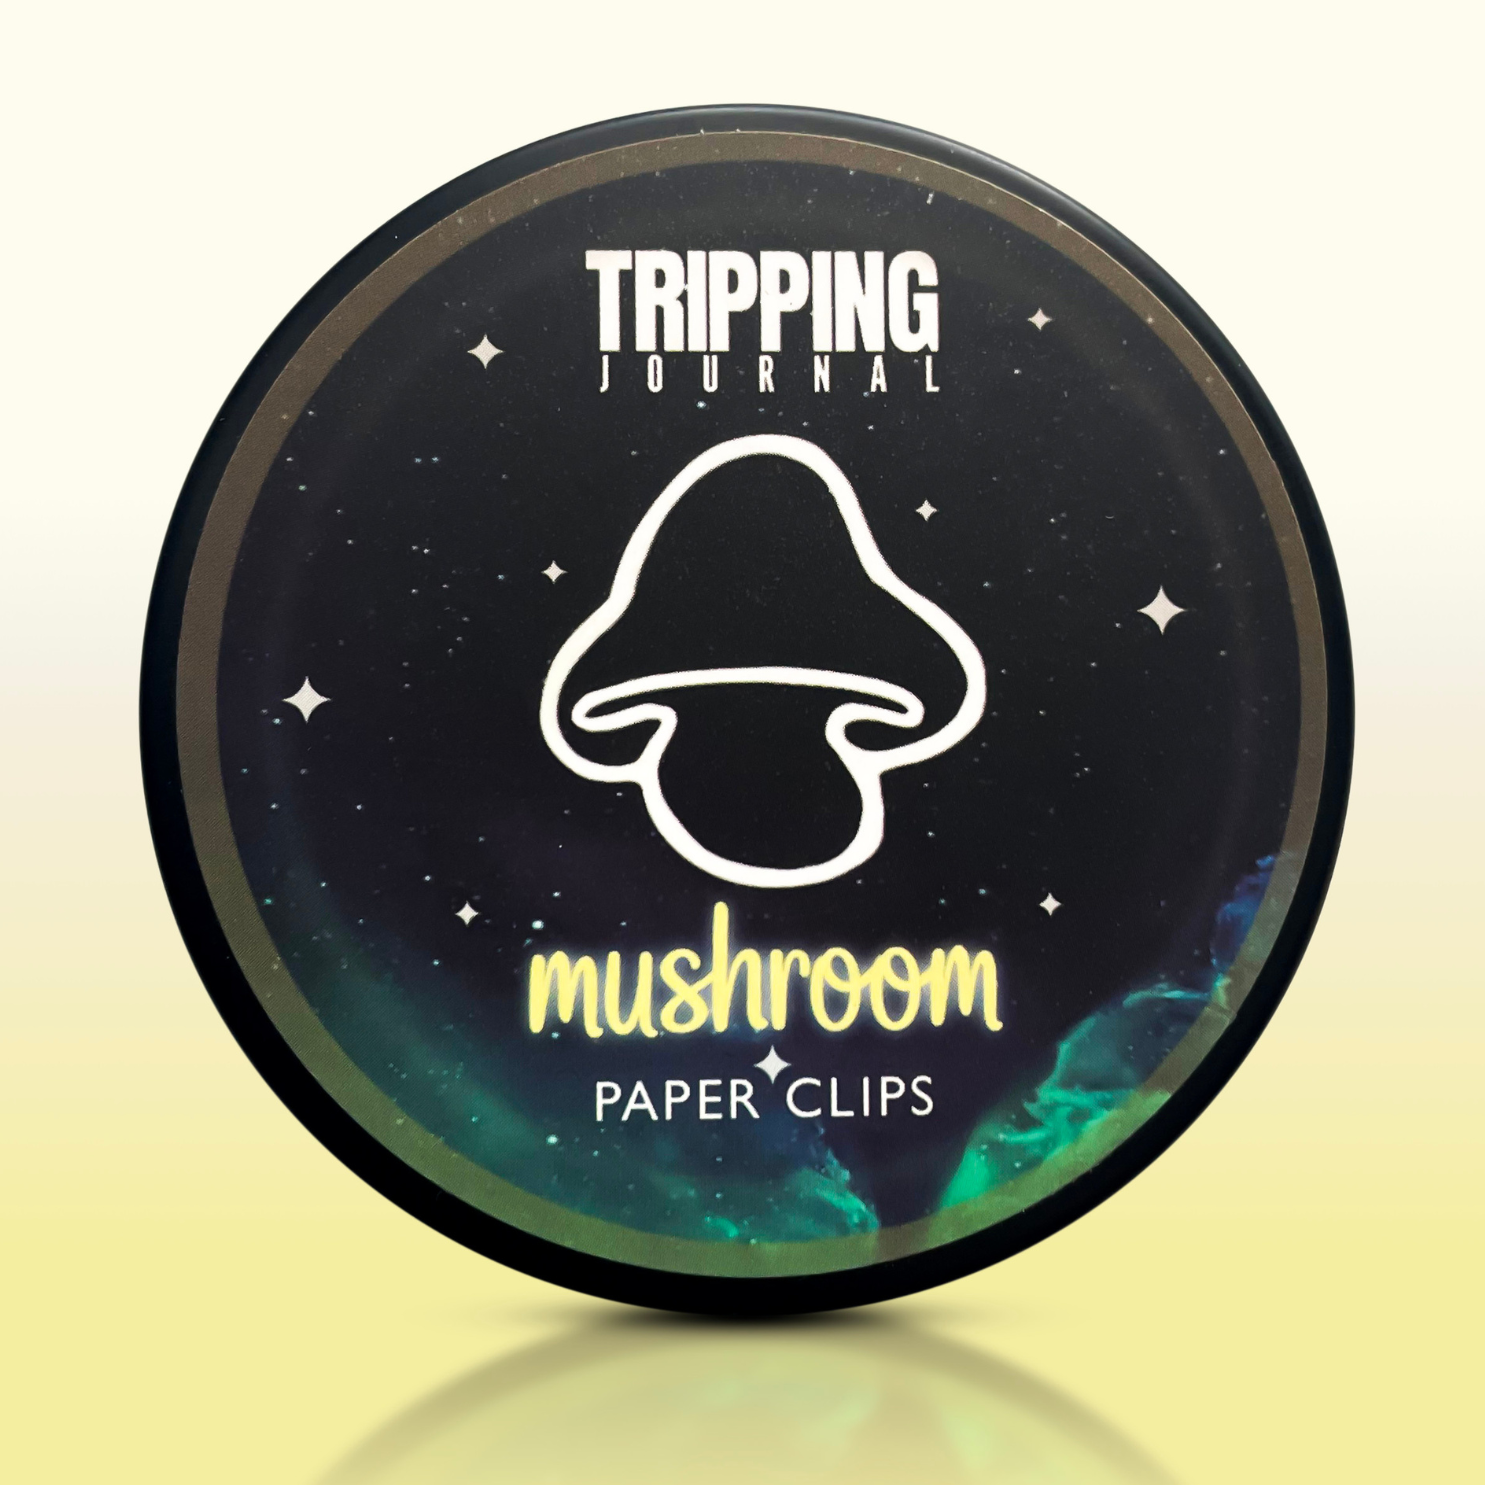 Mushroom Paper Clips (25 pack) ⚡Exclusive⚡ – TrippingJournal